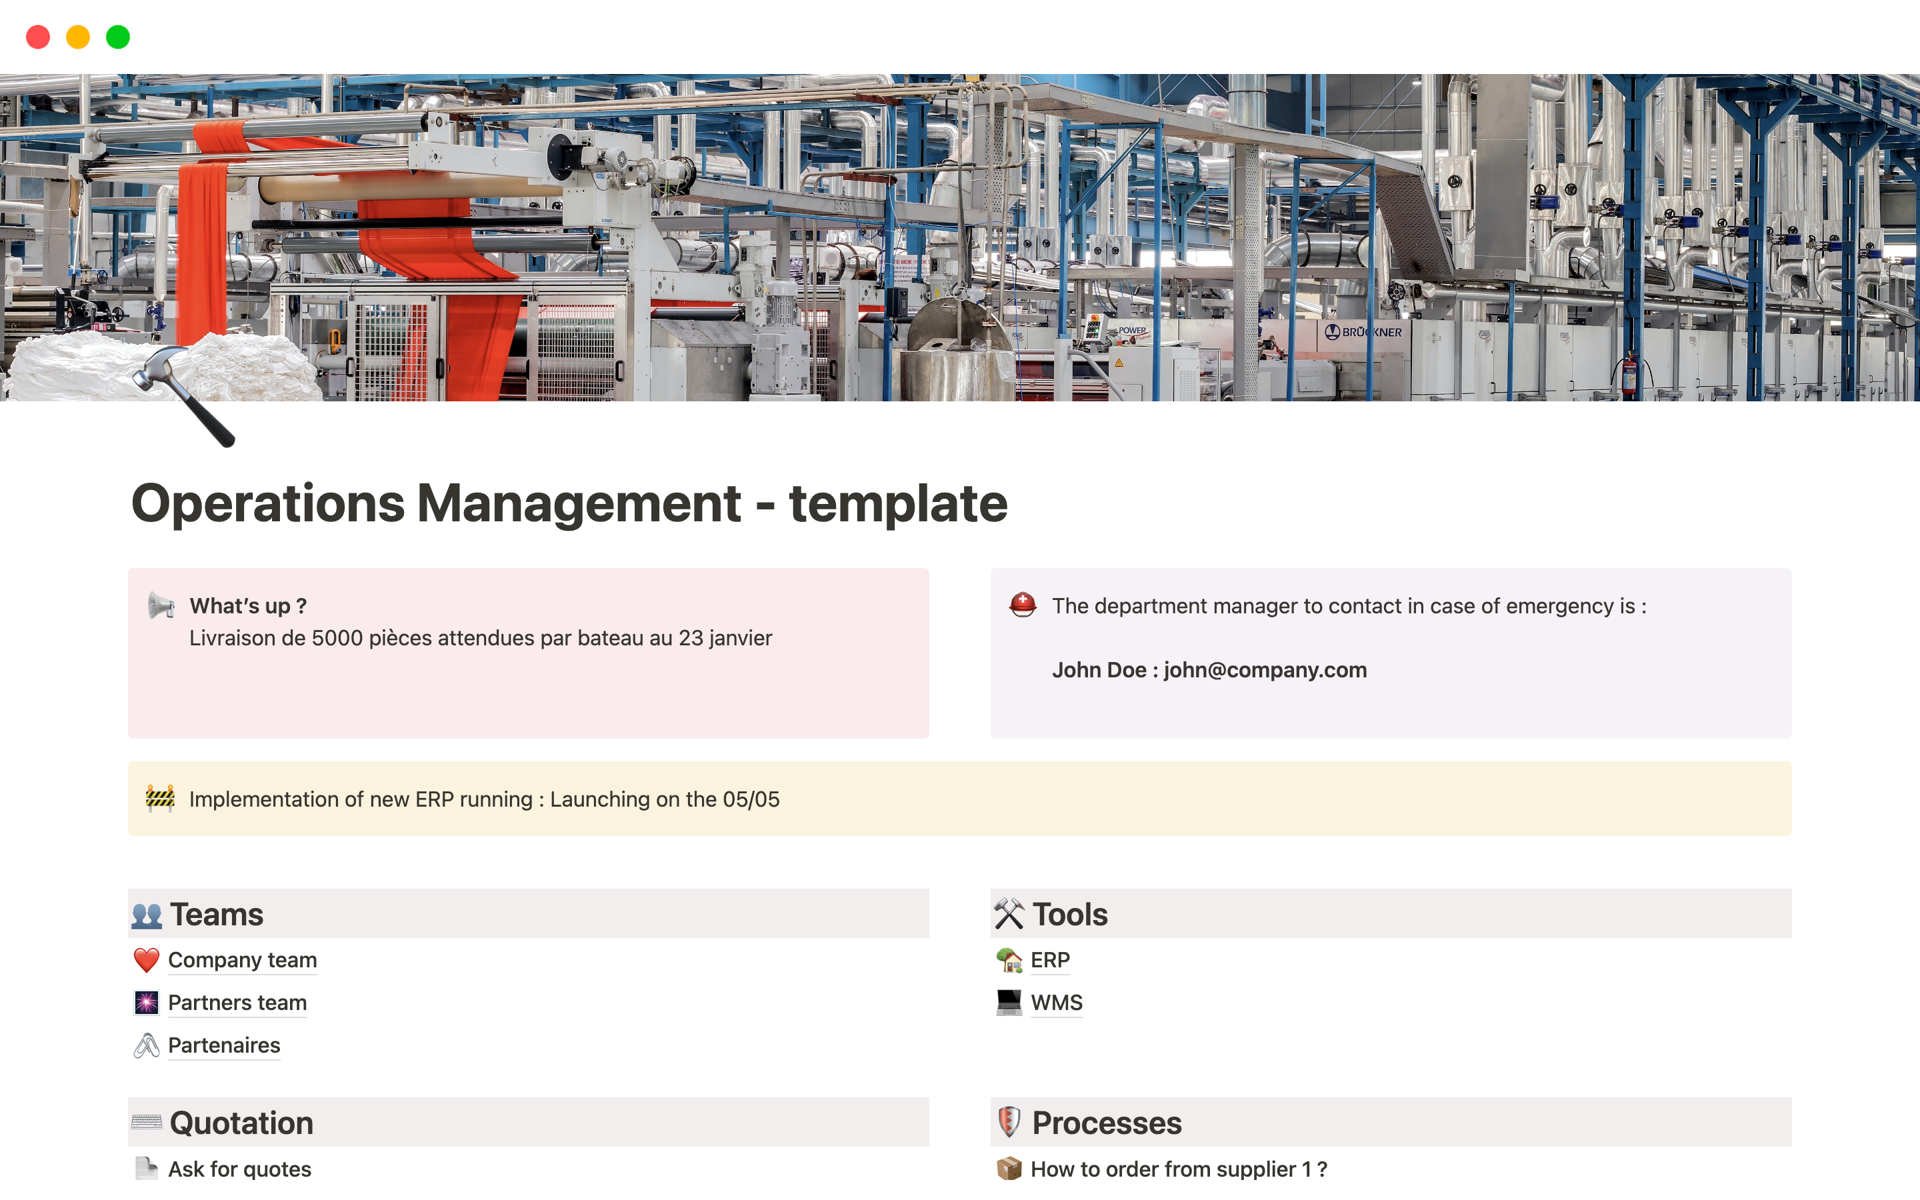 Manage your operations (manufacturing and logistics) quickyly with this Notion template !